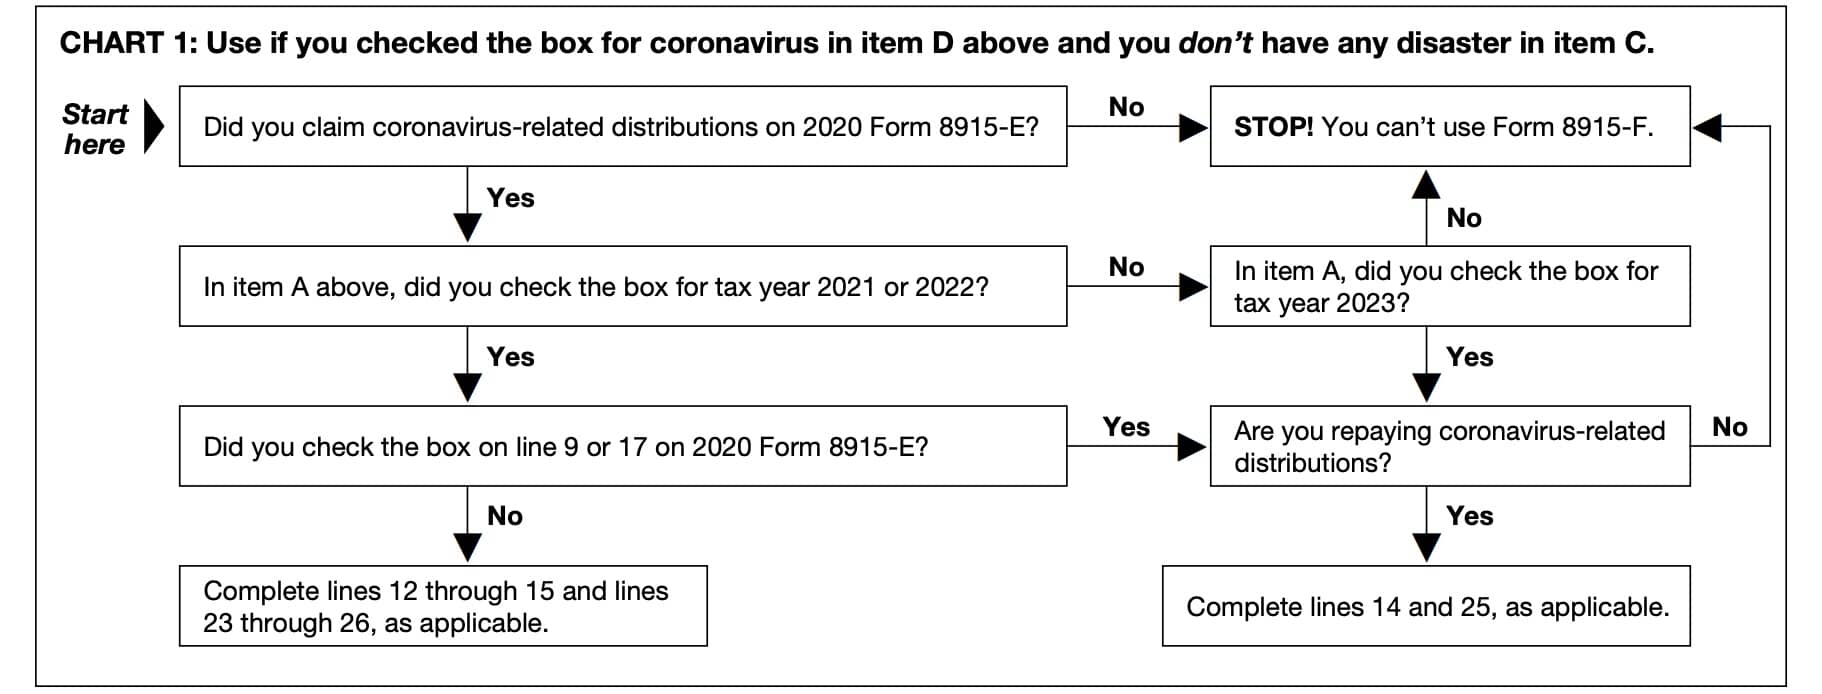 Chart 1: Use if you checked the coronavirus box and do not have a disaster in item c